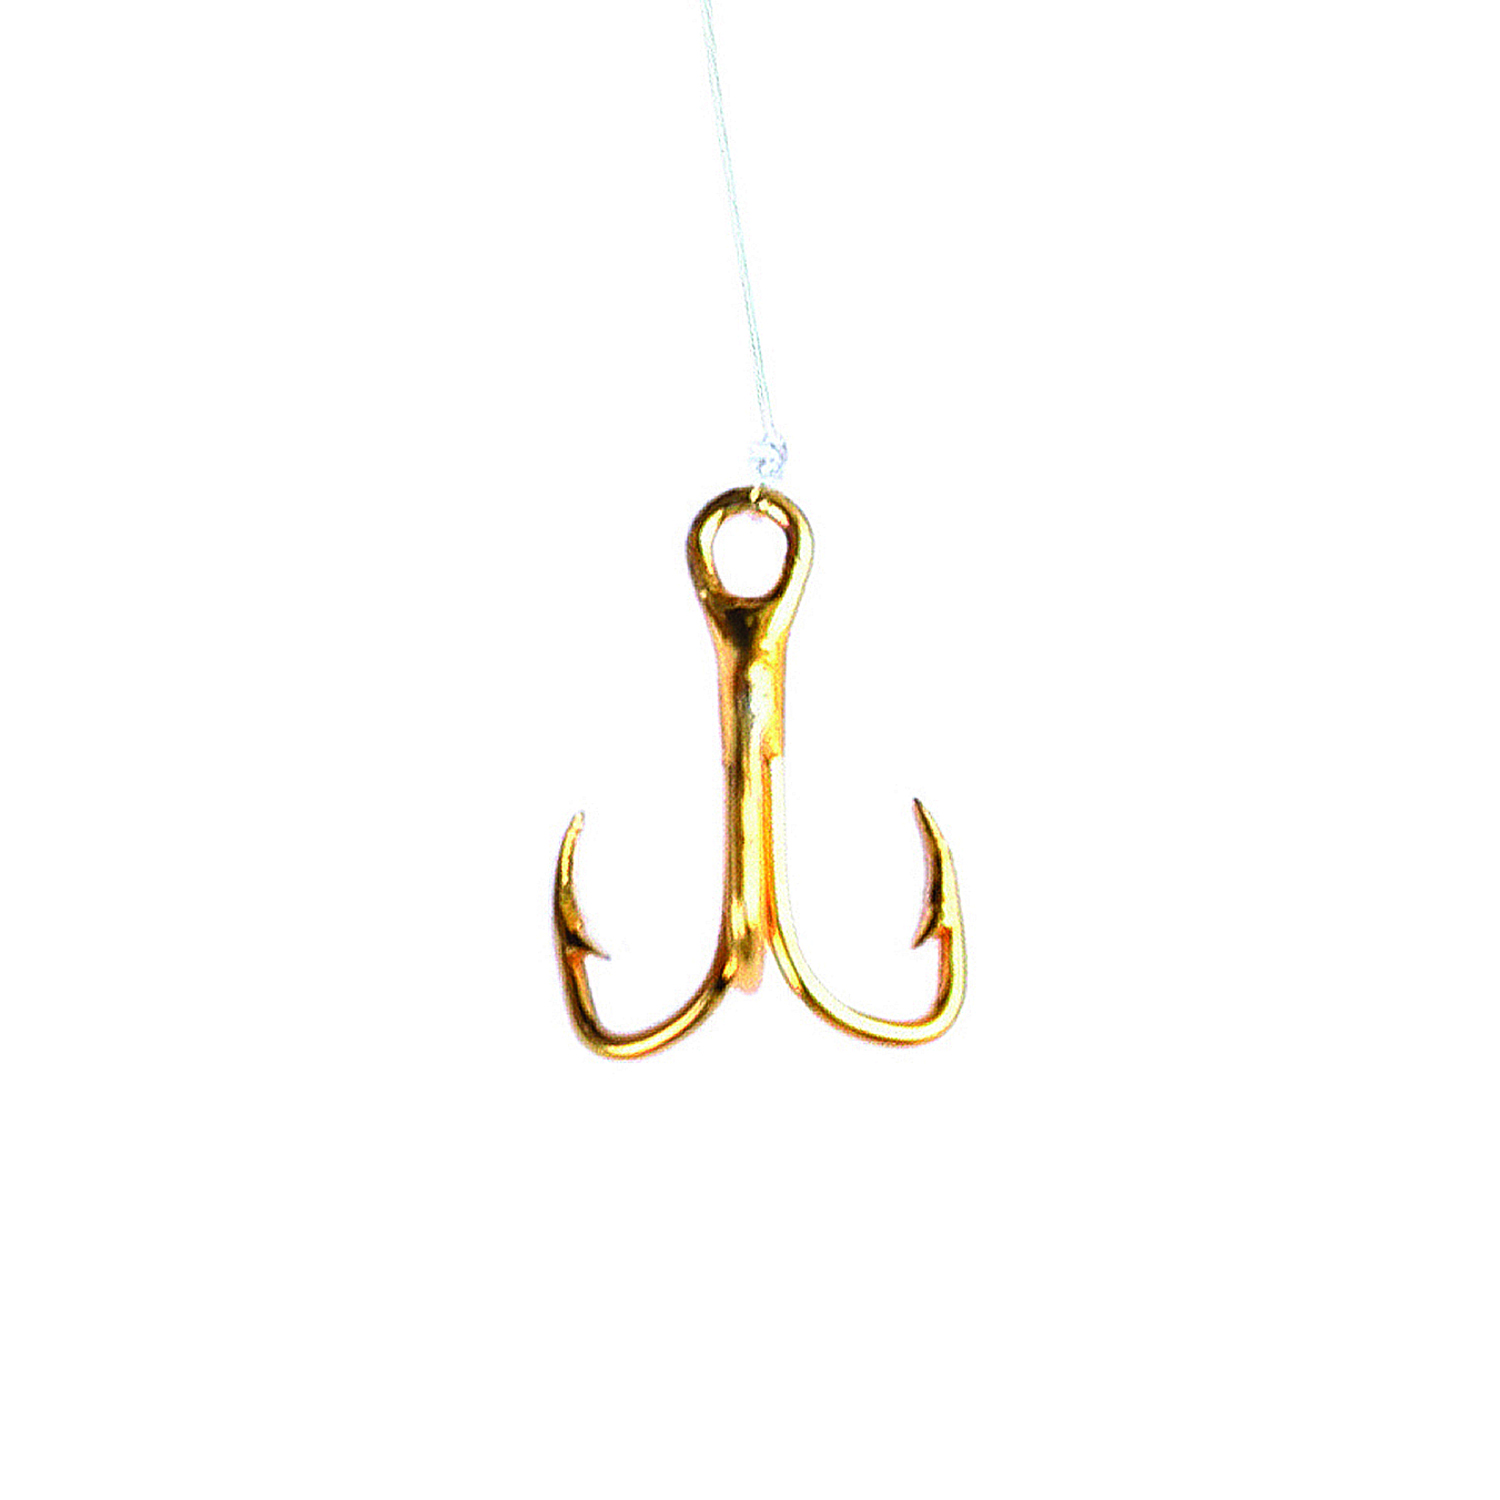 Eagle Claw Snelled Treble Hook w/Spring for Soft Bait